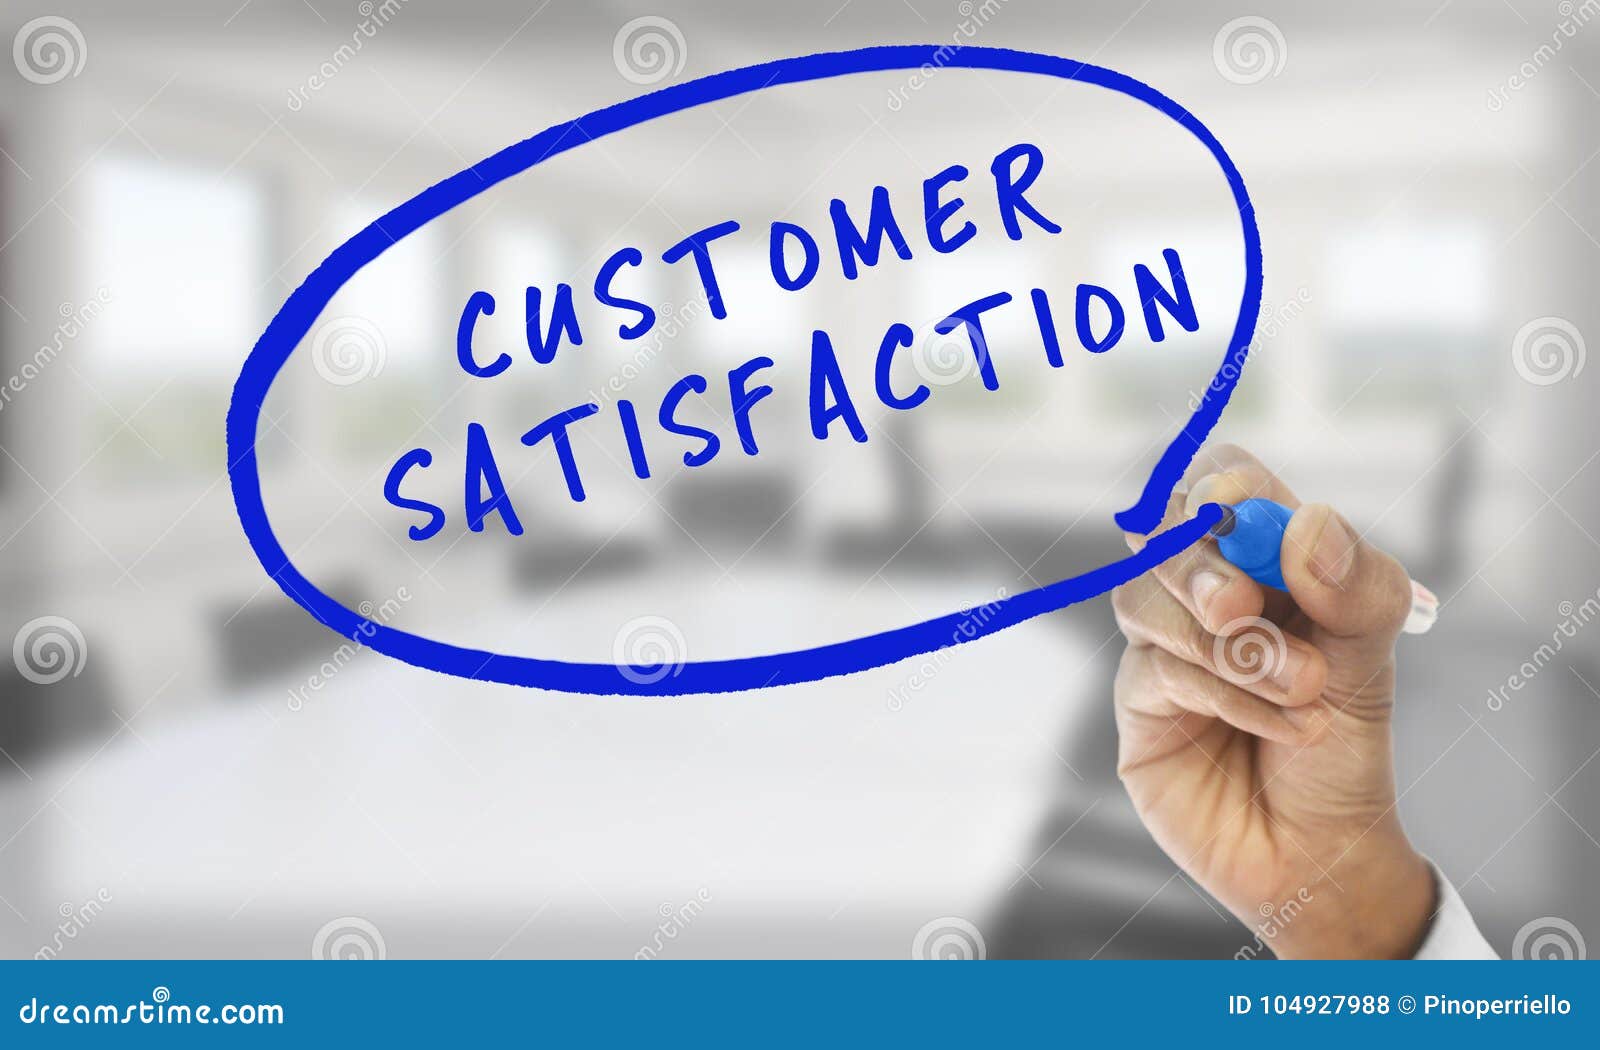 Essay about customer satisfaction